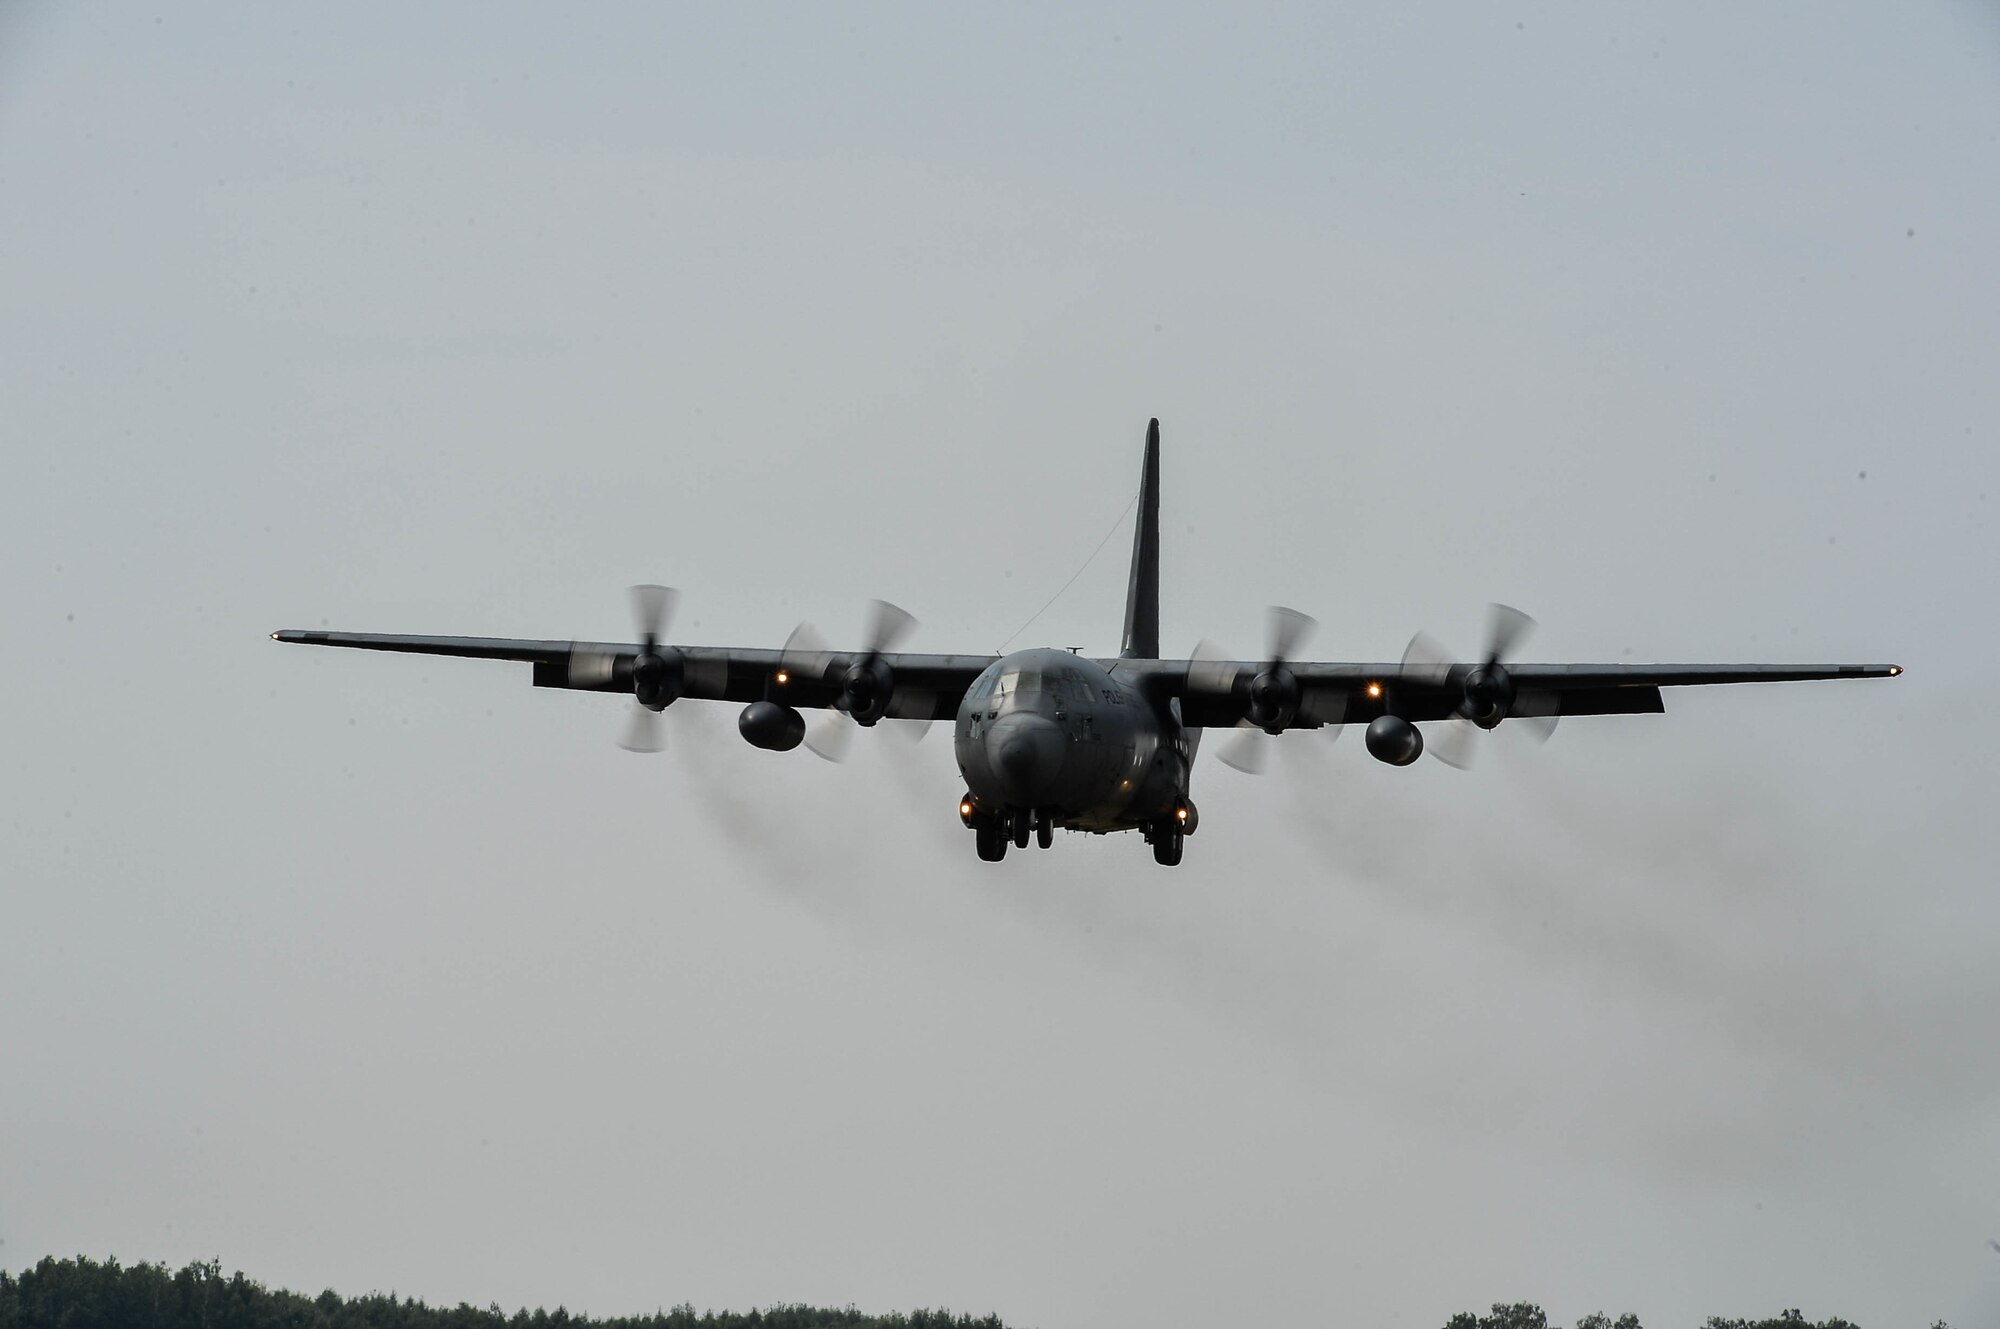 A Polish Air Force C-130E approaches for landing at Powidz Air Base, Poland, Aug. 9, 2018. Polish and U.S. Airmen conducted bilateral exercises to bolster interoperability, improve transnational partnership, and exchange warfighting knowledge. (U.S. Air Force photo by Senior Airman Joshua Magbanua)